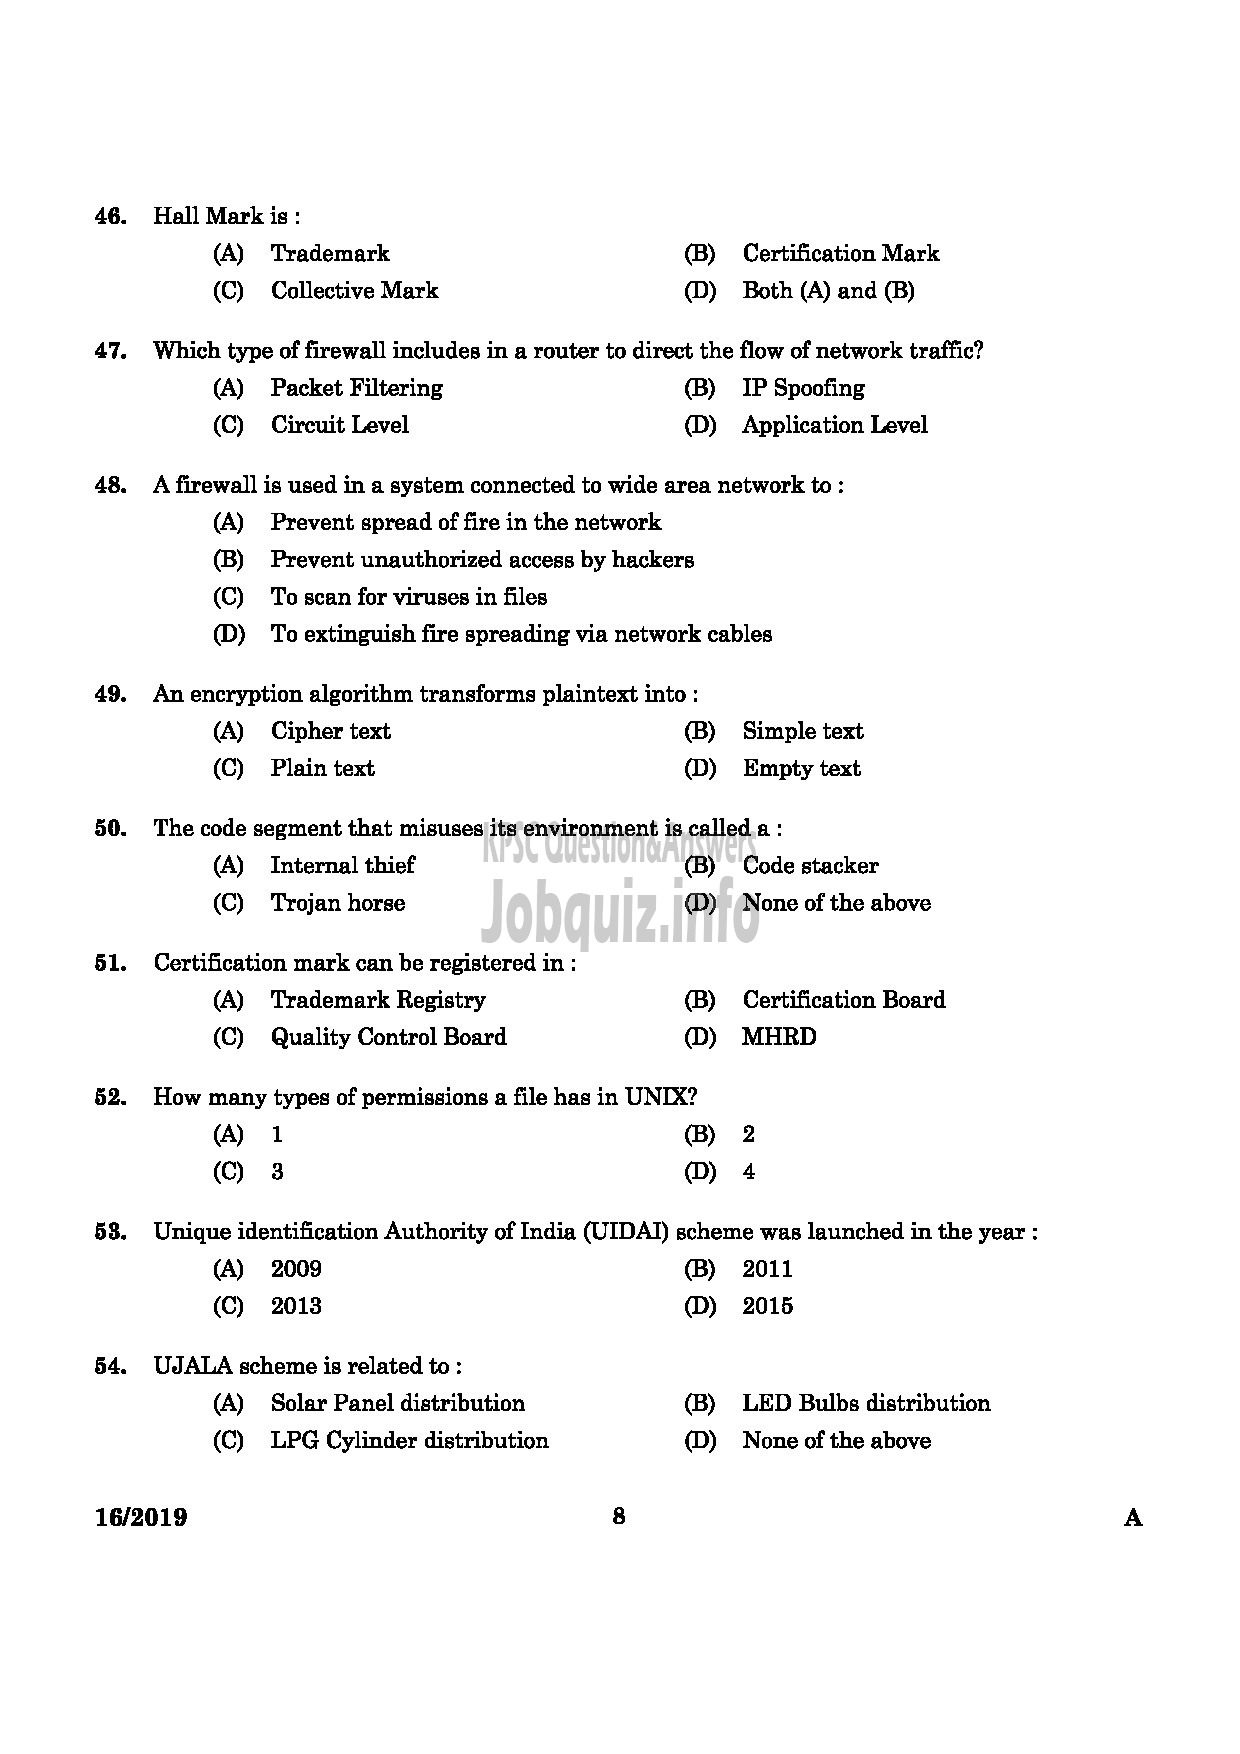 Kerala PSC Question Paper - JUNIOR INSTRUCTOR SOFTWARE TESTING ASSISTANT INDUSTRIAL TRAINING -6